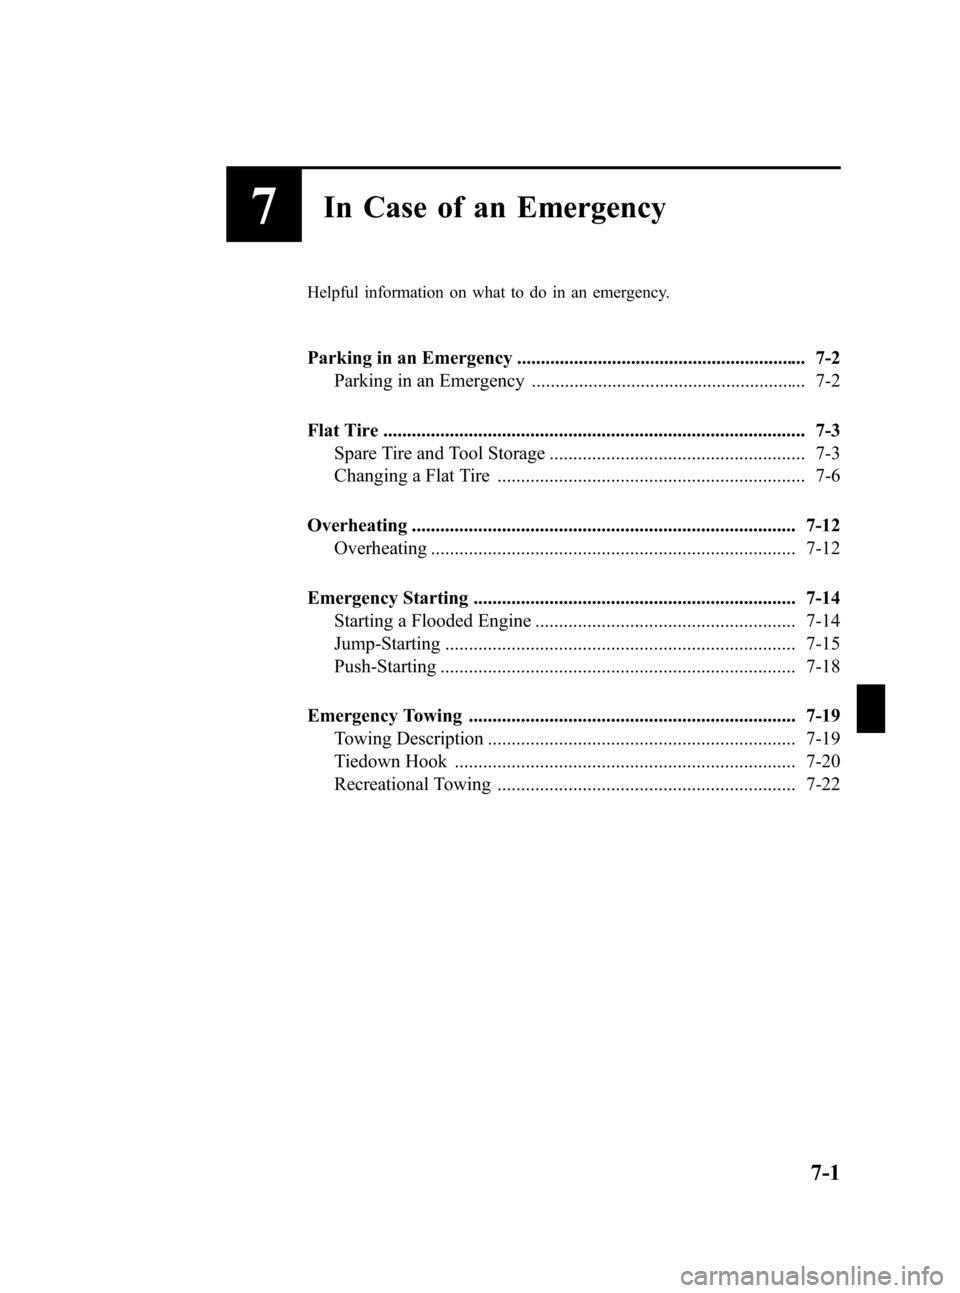 MAZDA MODEL 3 HATCHBACK 2006   (in English) Service Manual Black plate (227,1)
7In Case of an Emergency
Helpful information on what to do in an emergency.
Parking in an Emergency ............................................................. 7-2
Parking in an 